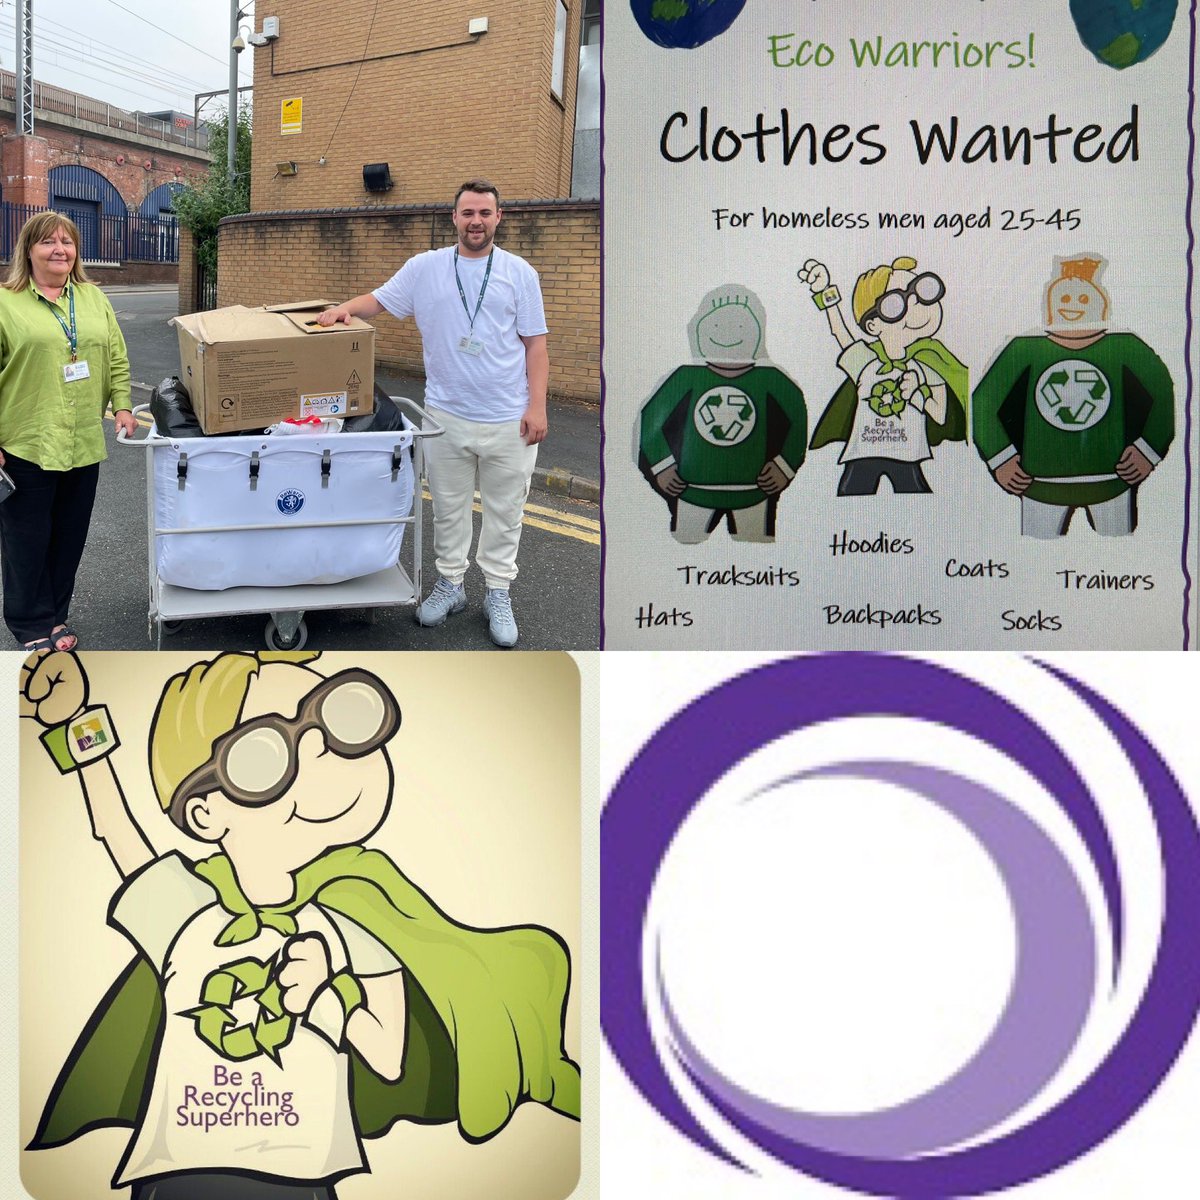 Thank you to all the parents and carers @OPA_LL for their generous donations AND to the eco warriors for all their hard work. St Anne’s in Leeds is always grateful for clothes donations. Everyone, get your schools involved! @ResourceCen #homelessness